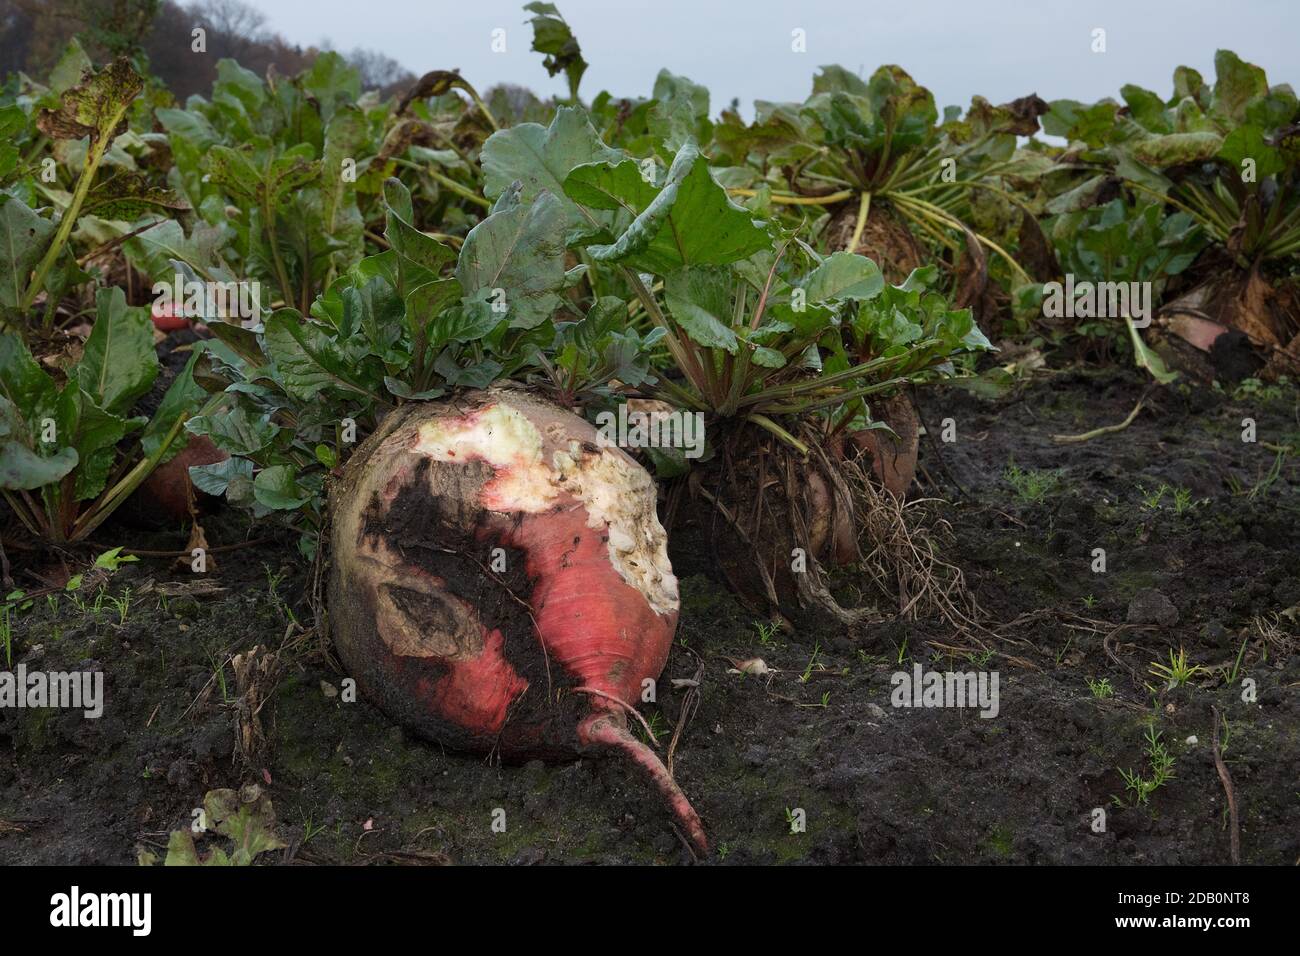 Fodder beet on a field, gnawed by mice or rabbits Stock Photo